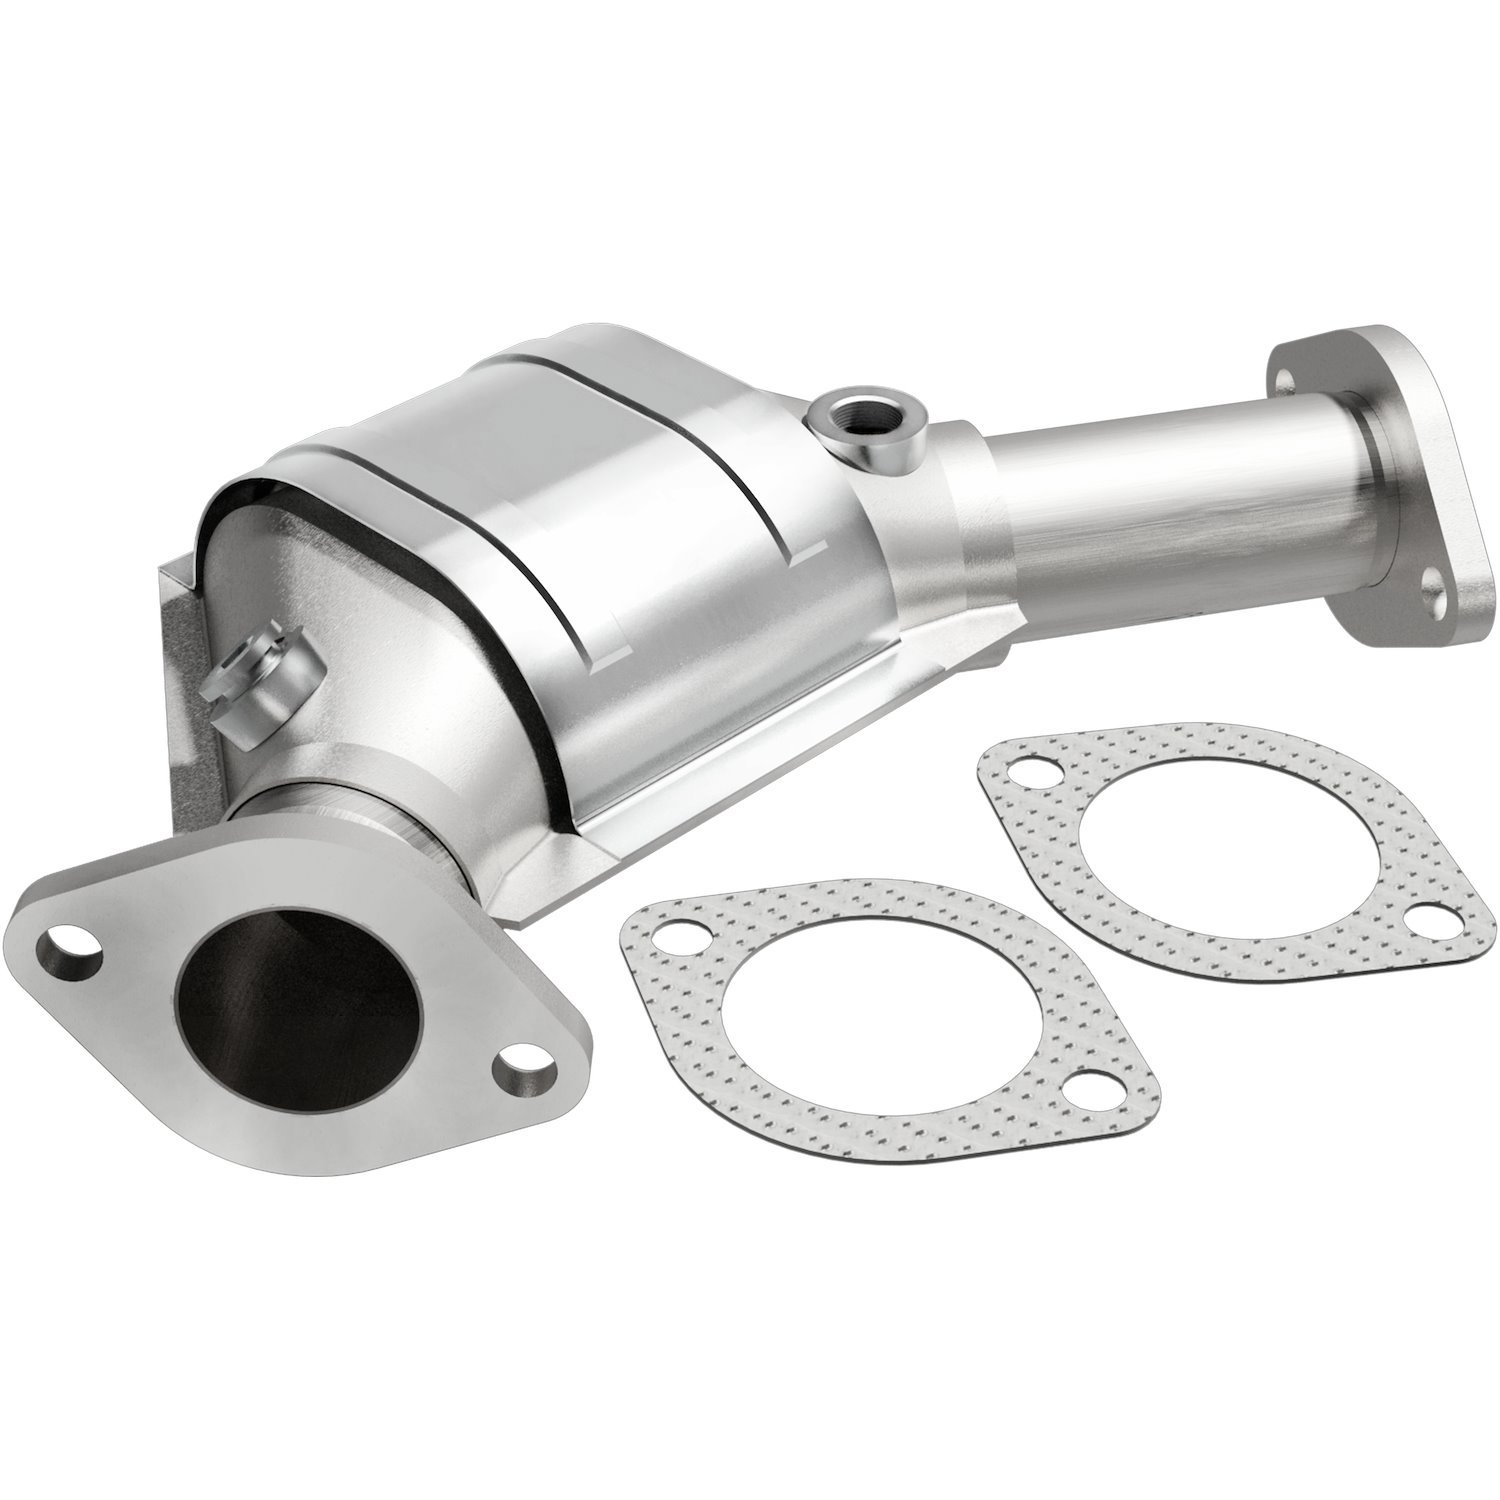 OEM Grade Federal / EPA Compliant Direct-Fit Catalytic Converter 51122